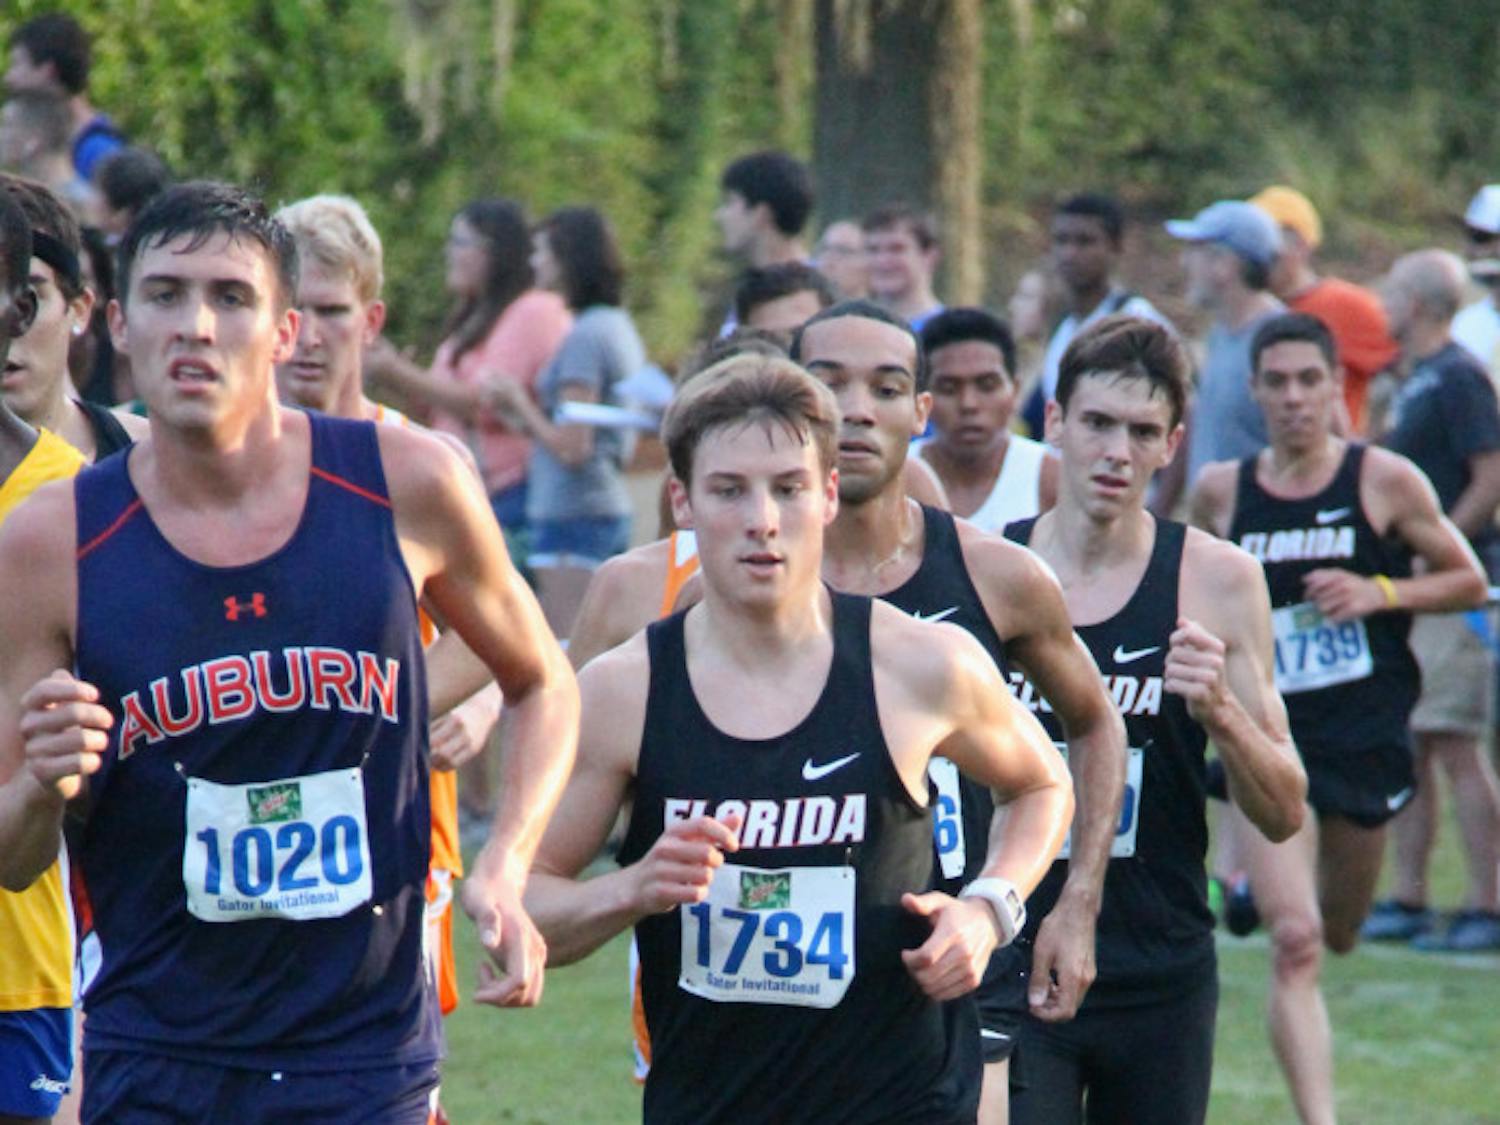 Junior Jimmy Clark (1734) races during the Mountain Dew Invitational on Sept. 14 in Gainesville.